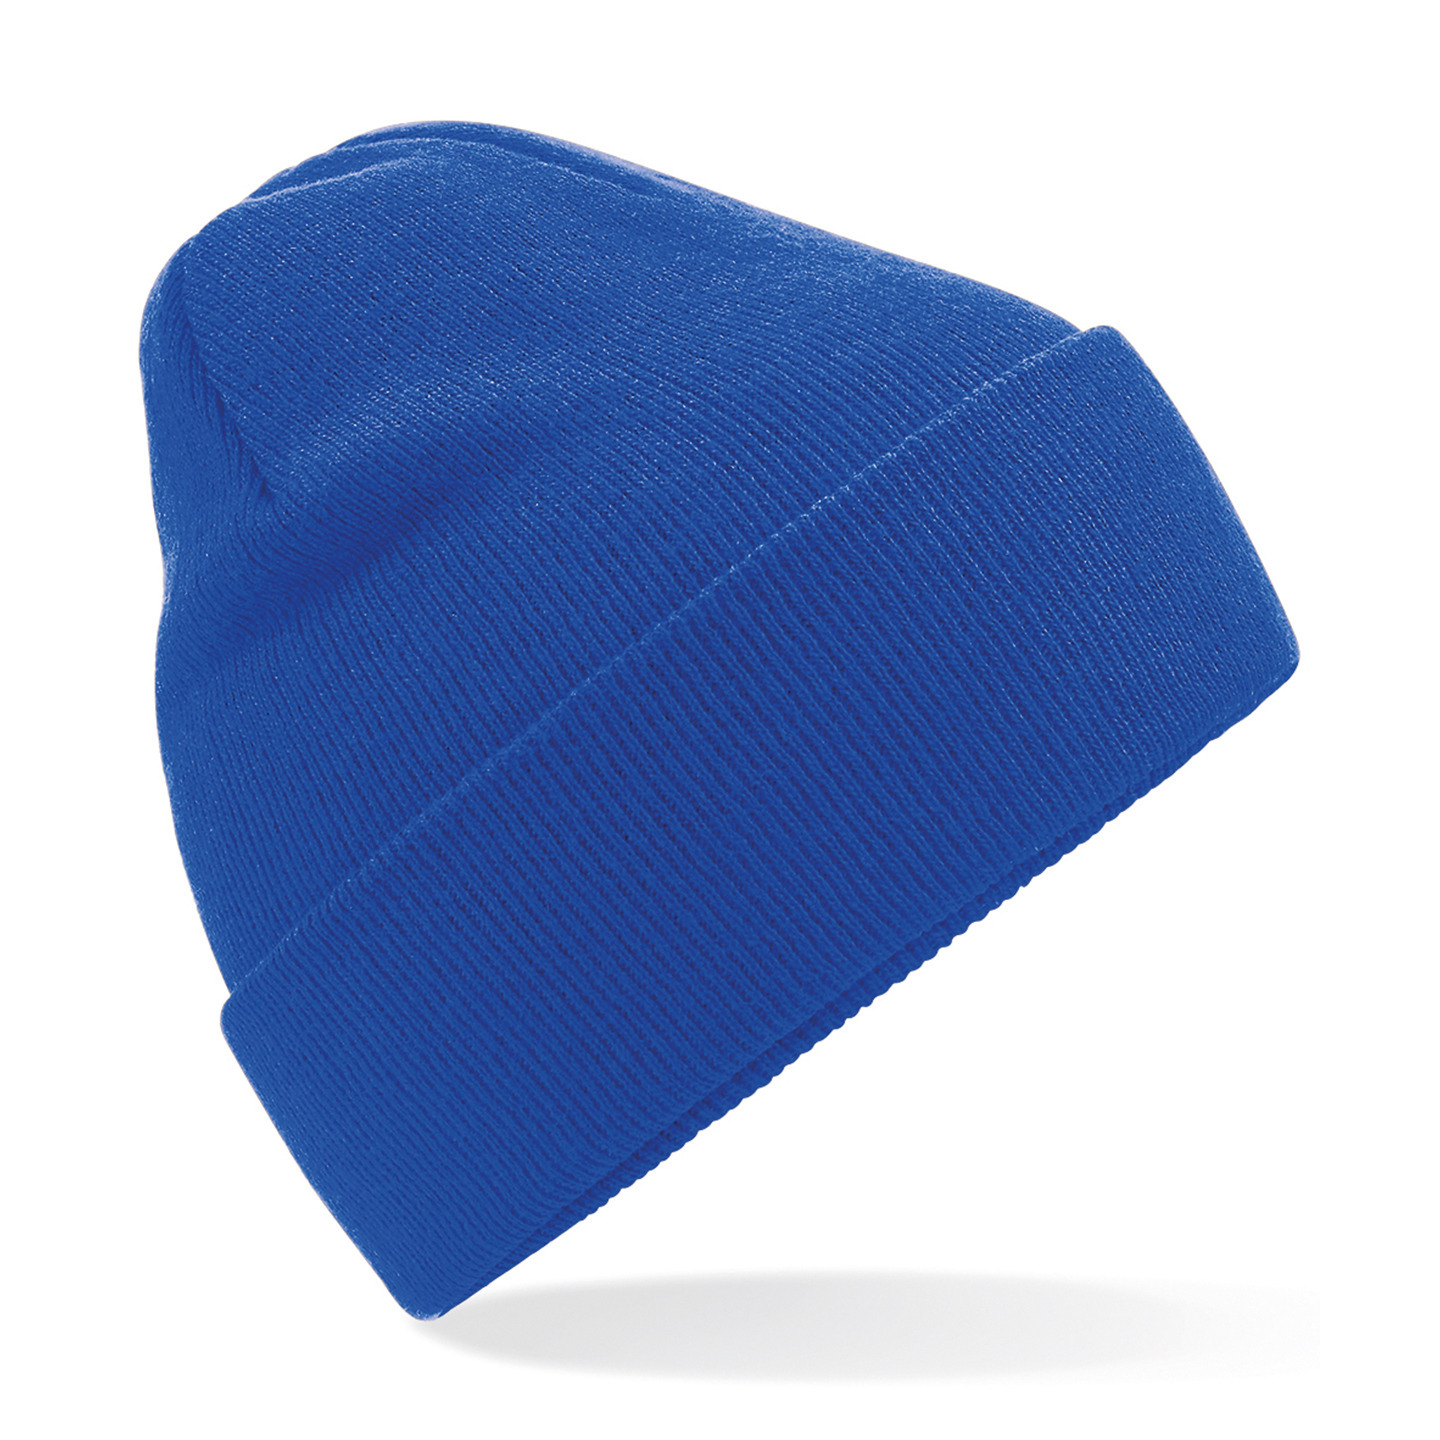 Heren/Dames Beanie Wintermuts blauw 100% gerecycled ribbed polyester